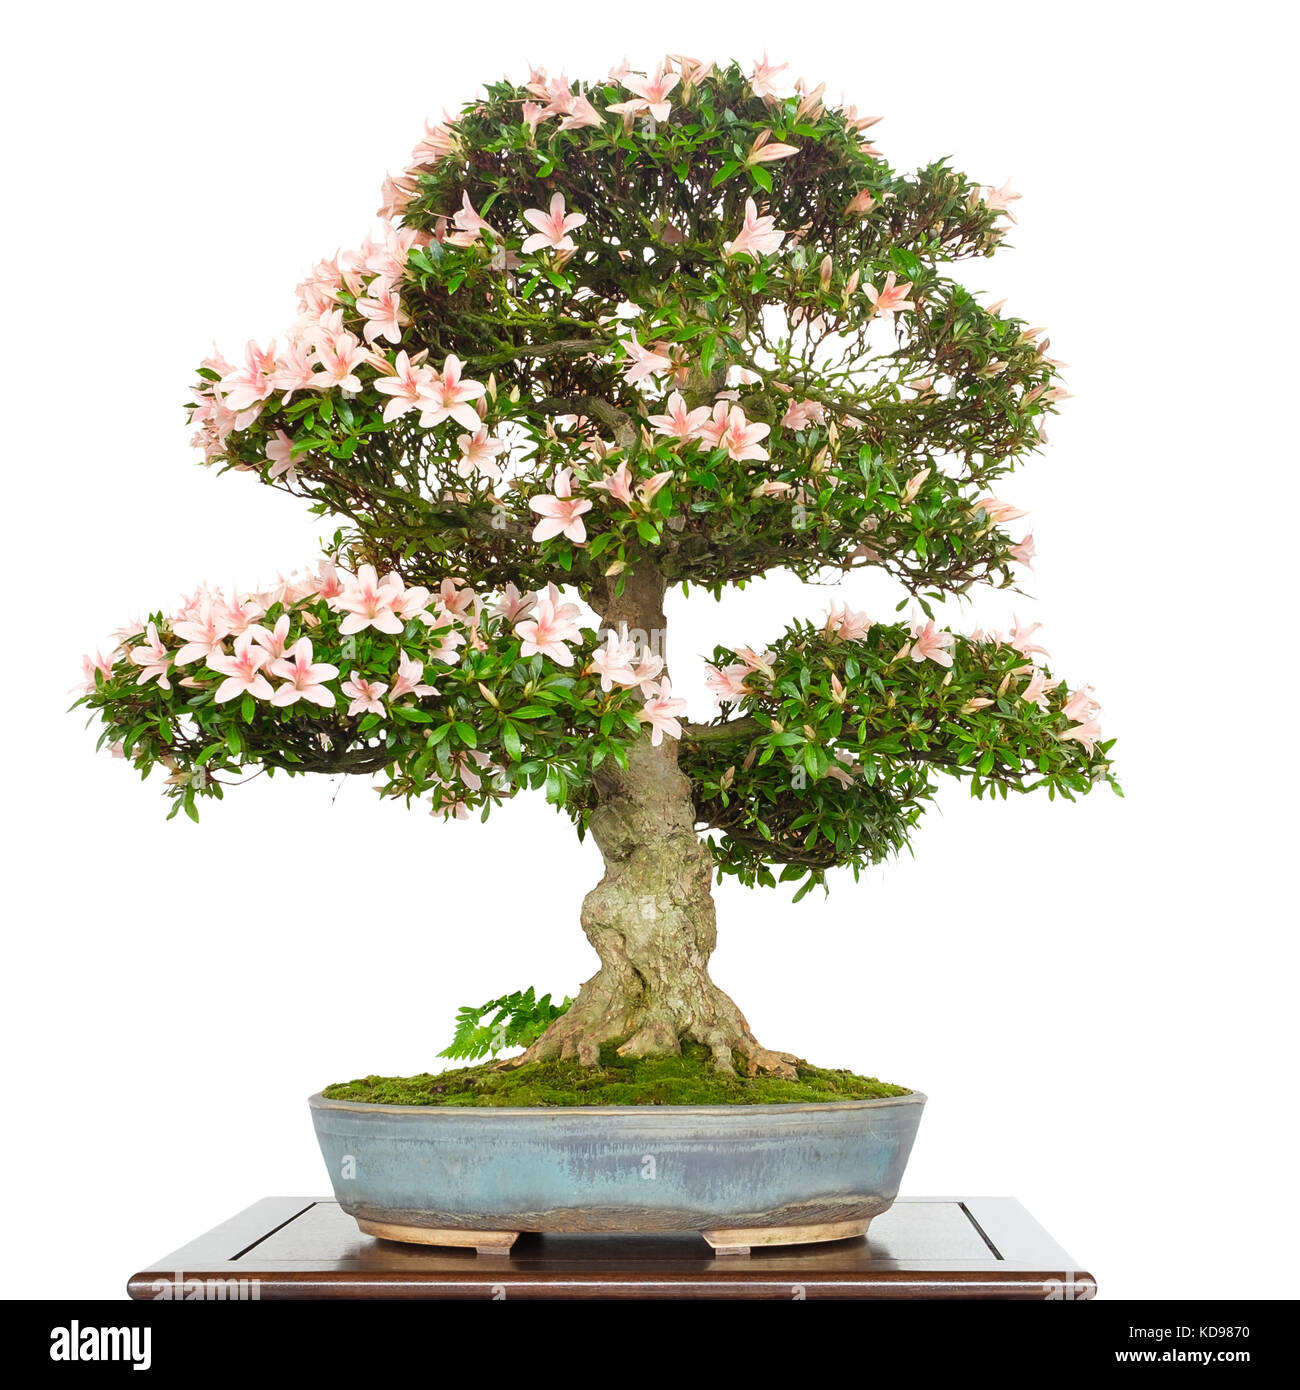 Azalea Rhododendron as bonsai tree with pink flowers and old bark Stock Photo